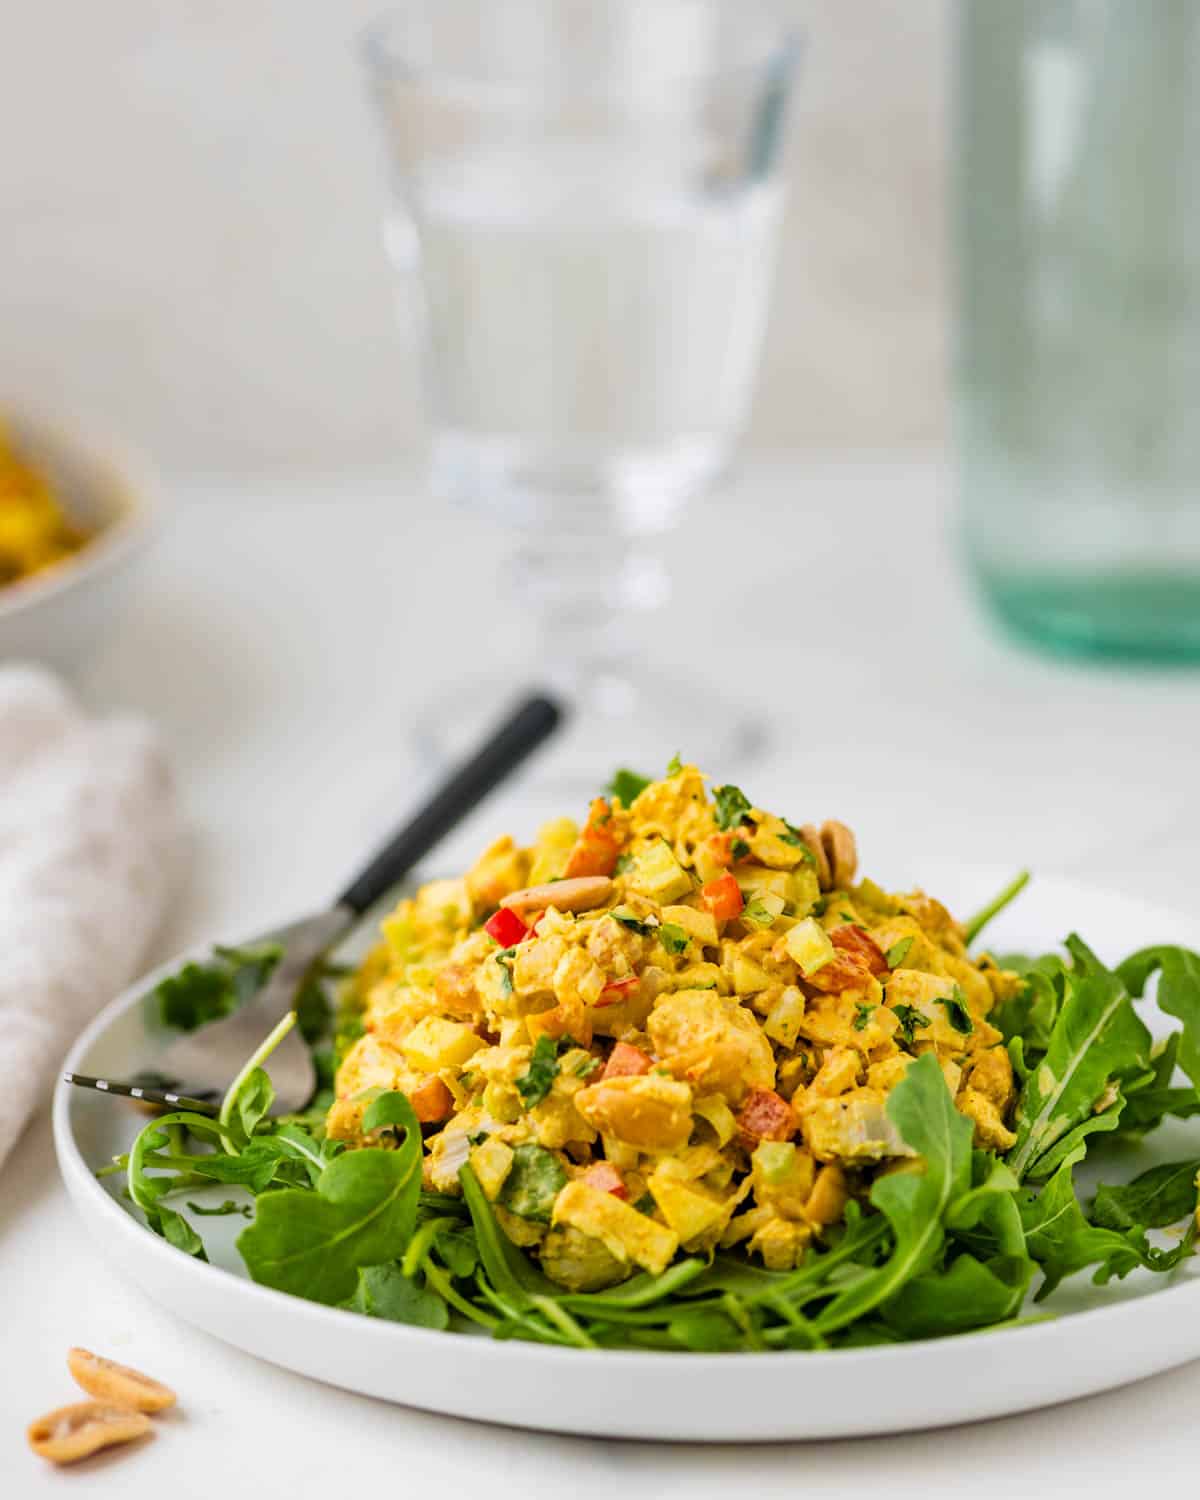 Curried chicken salad on a bed of greens.